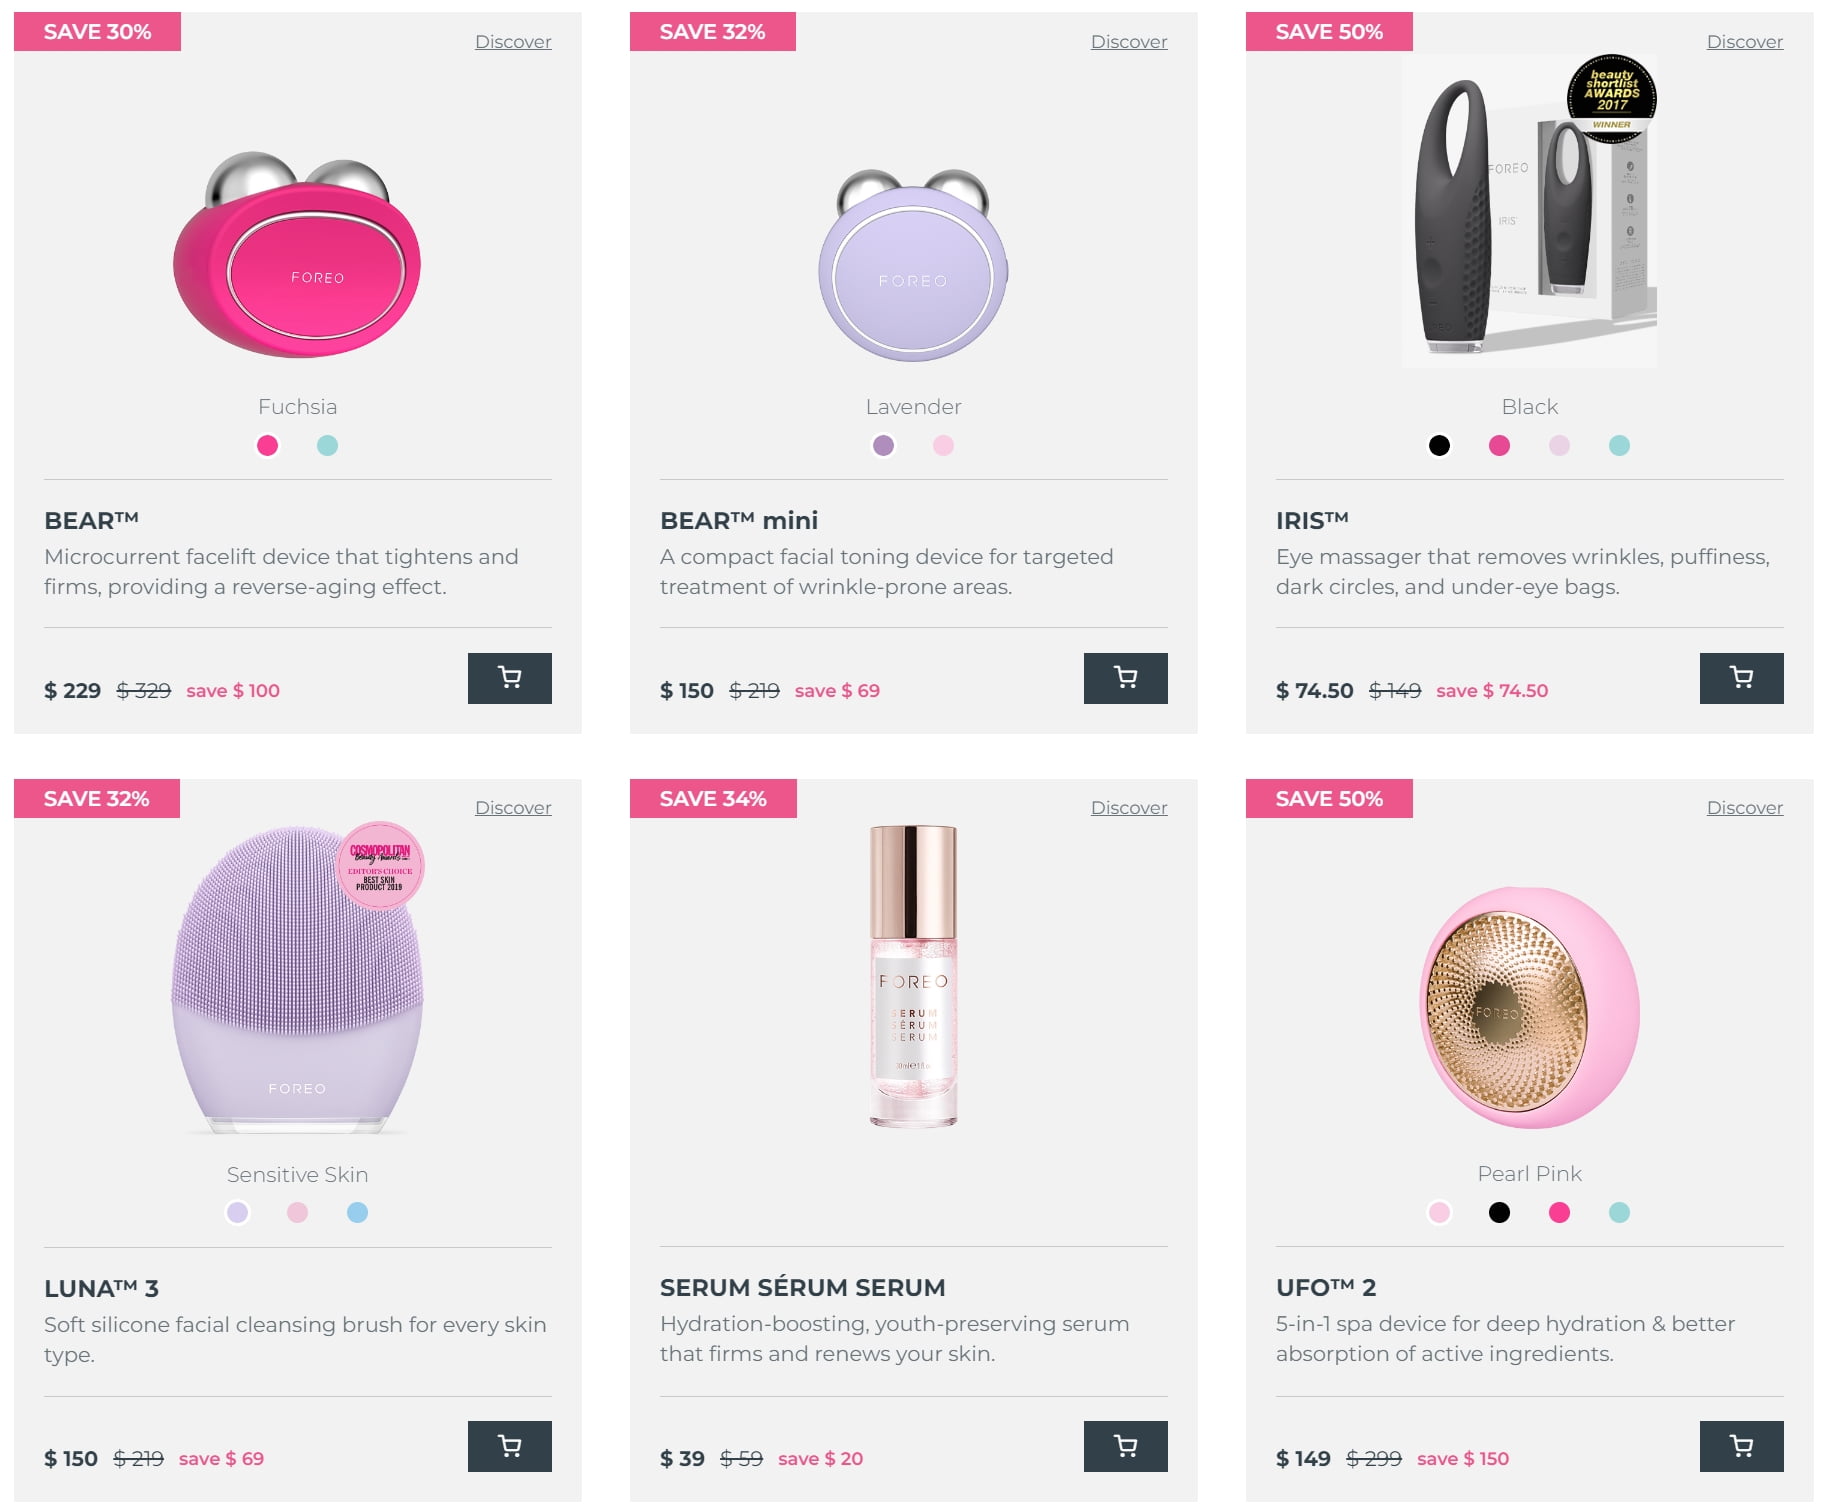 Up to 50% off selected at FOREO